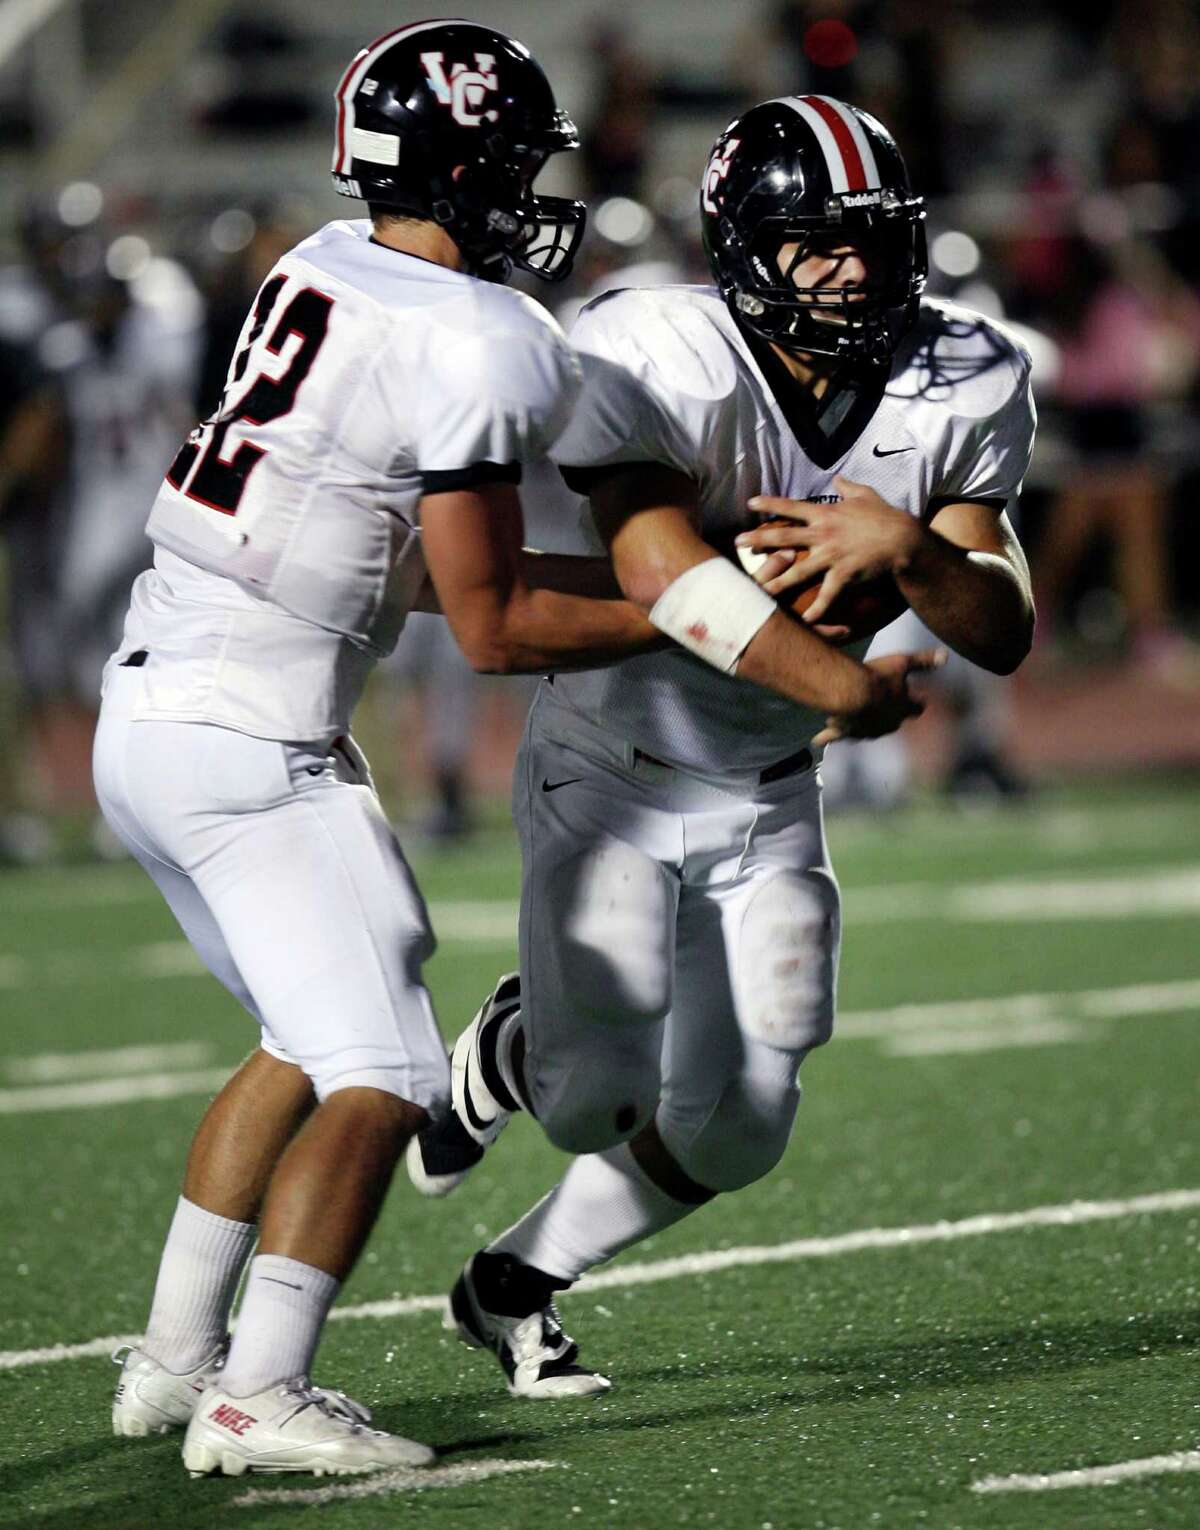 Churchill High School's Nate Peason passes off the ball to Nicholas Smisek during the first half of the game against Roosevelt Saturday, Oct. 26, 2013 at Comalander Stadium.